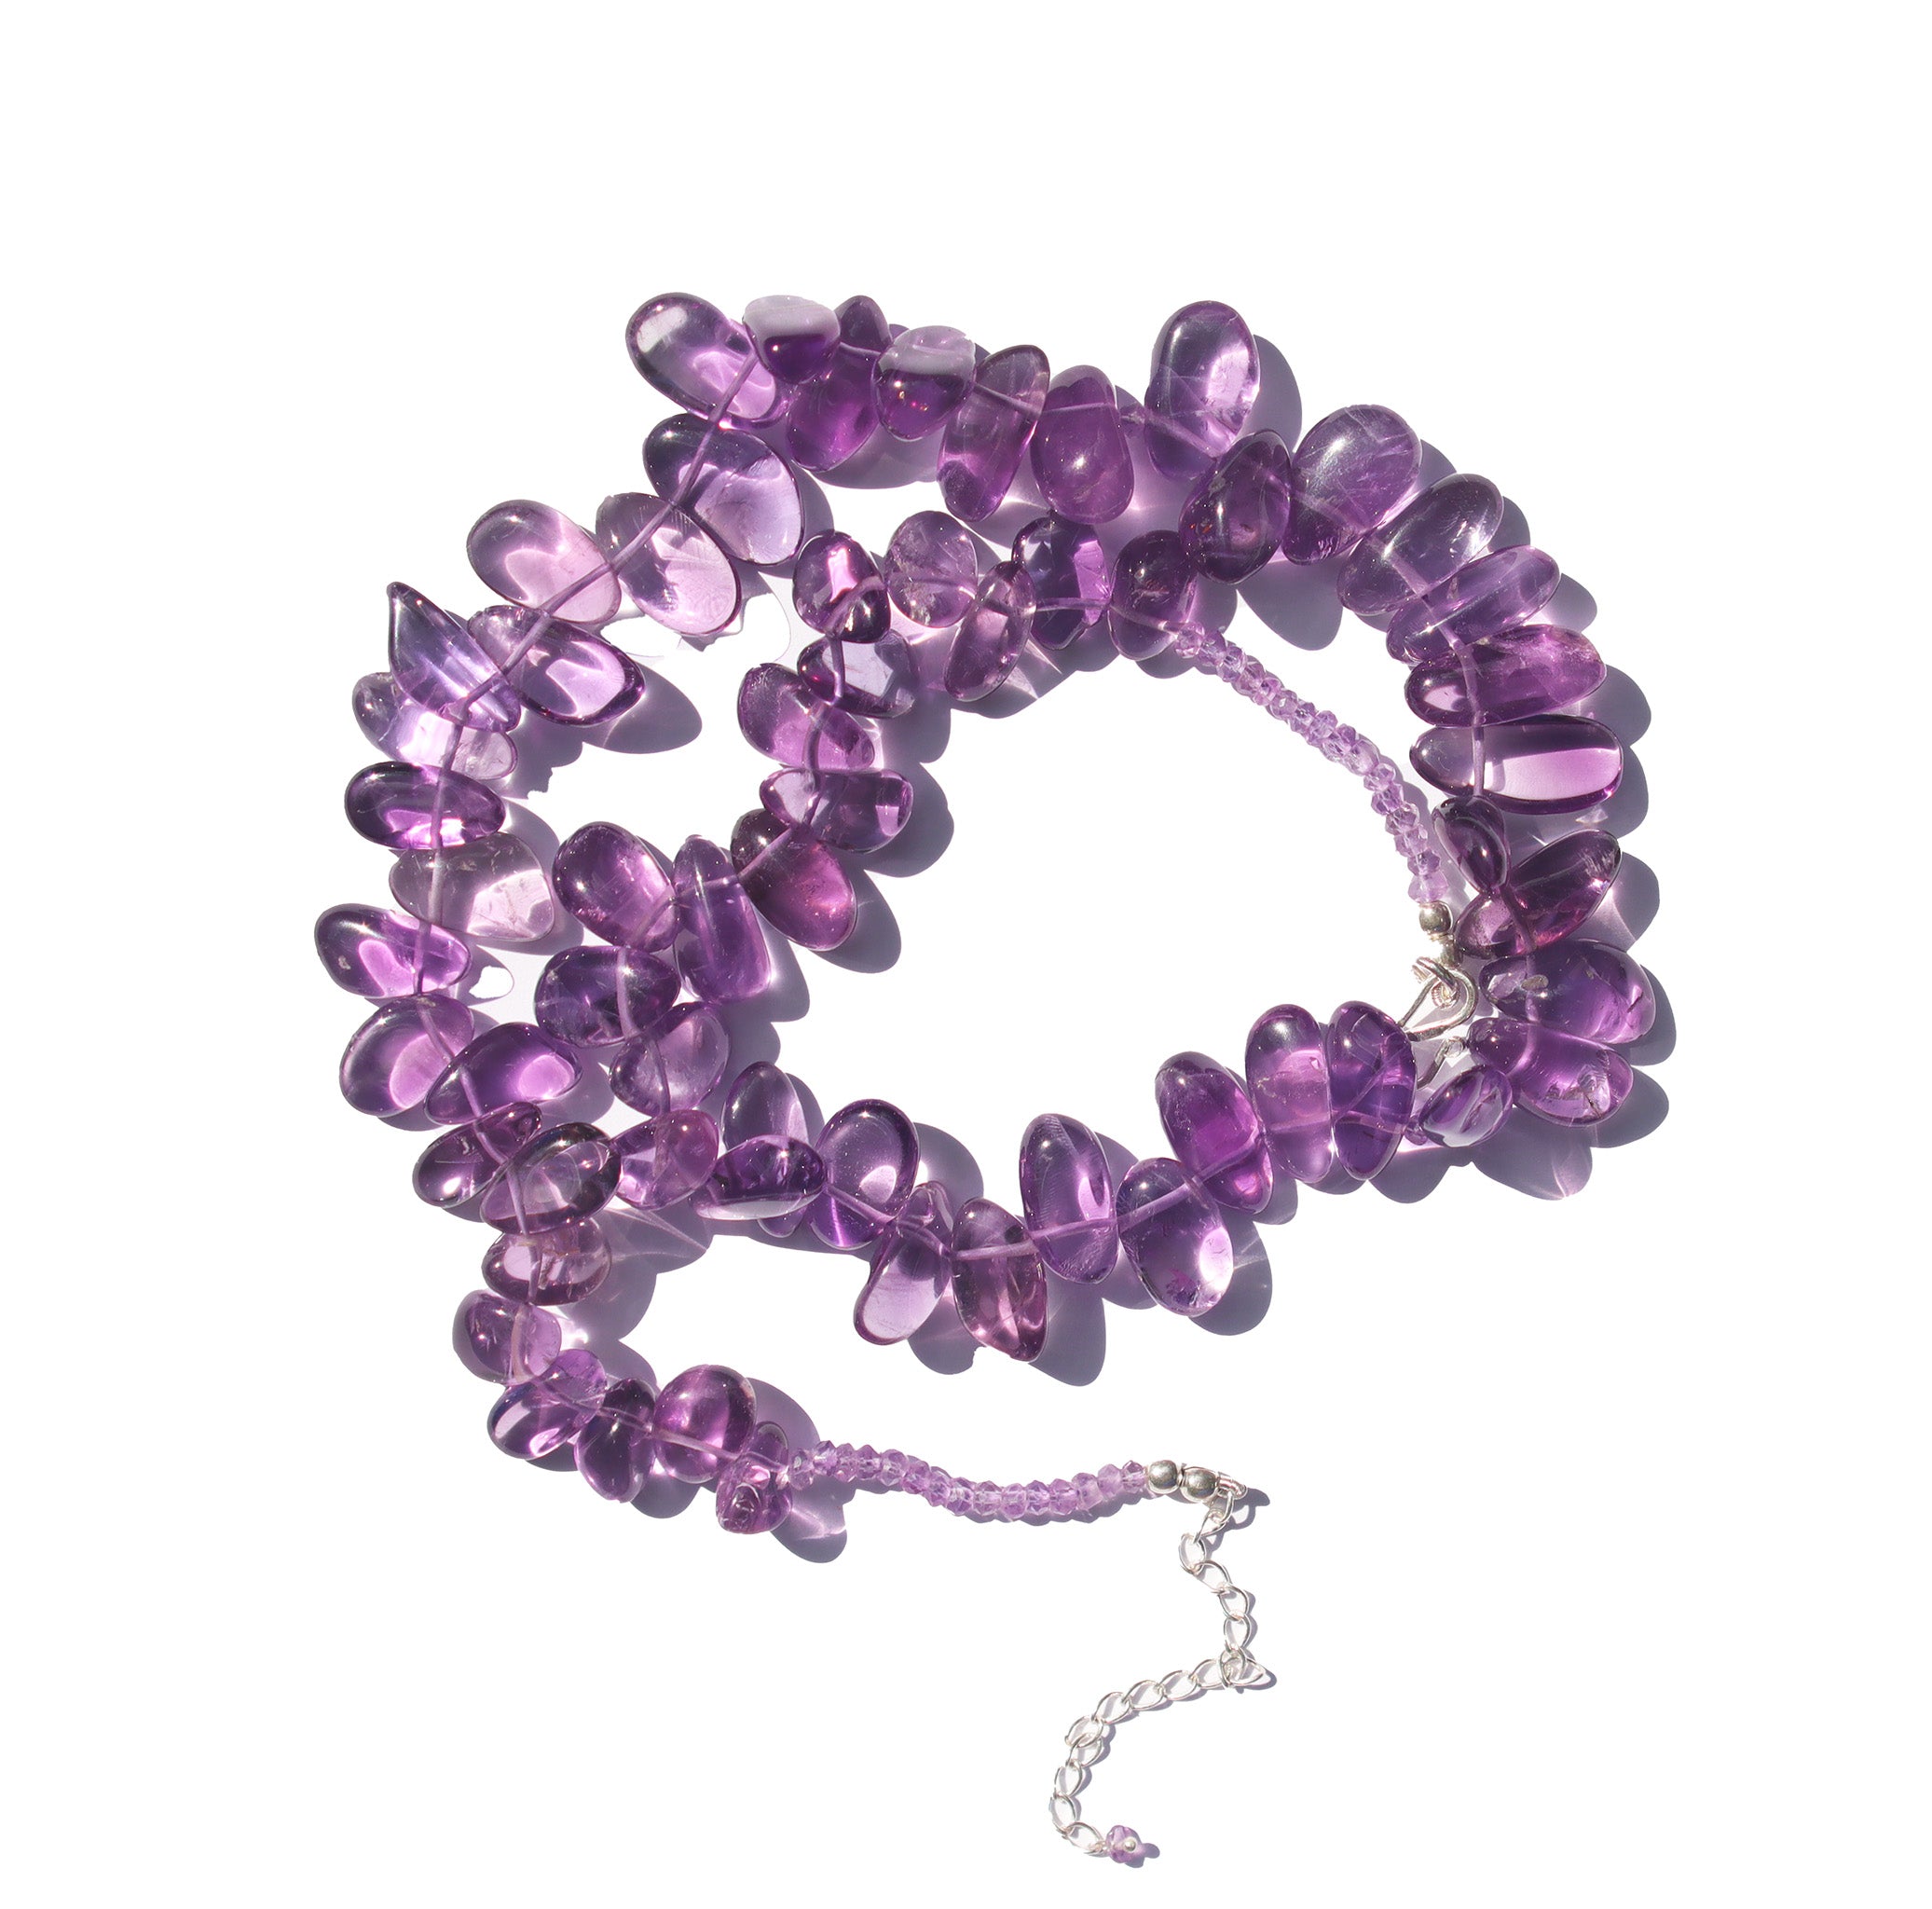 Silver Amethyst scatter necklace